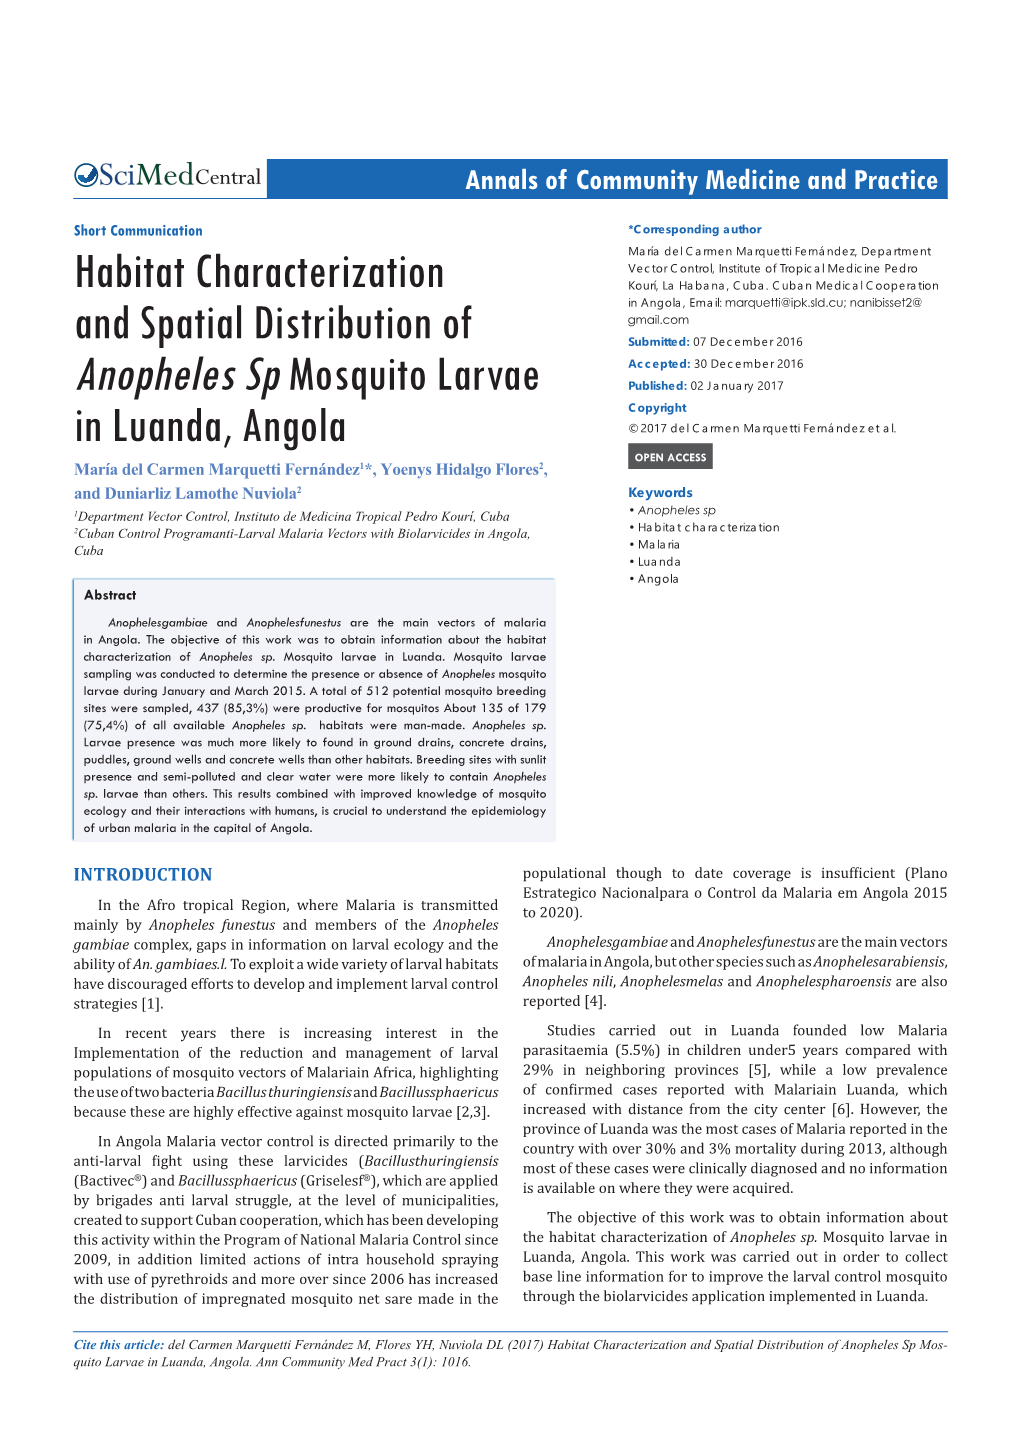 Habitat Characterization and Spatial Distribution of Anopheles Sp Mosquito Larvae in Luanda, Angola